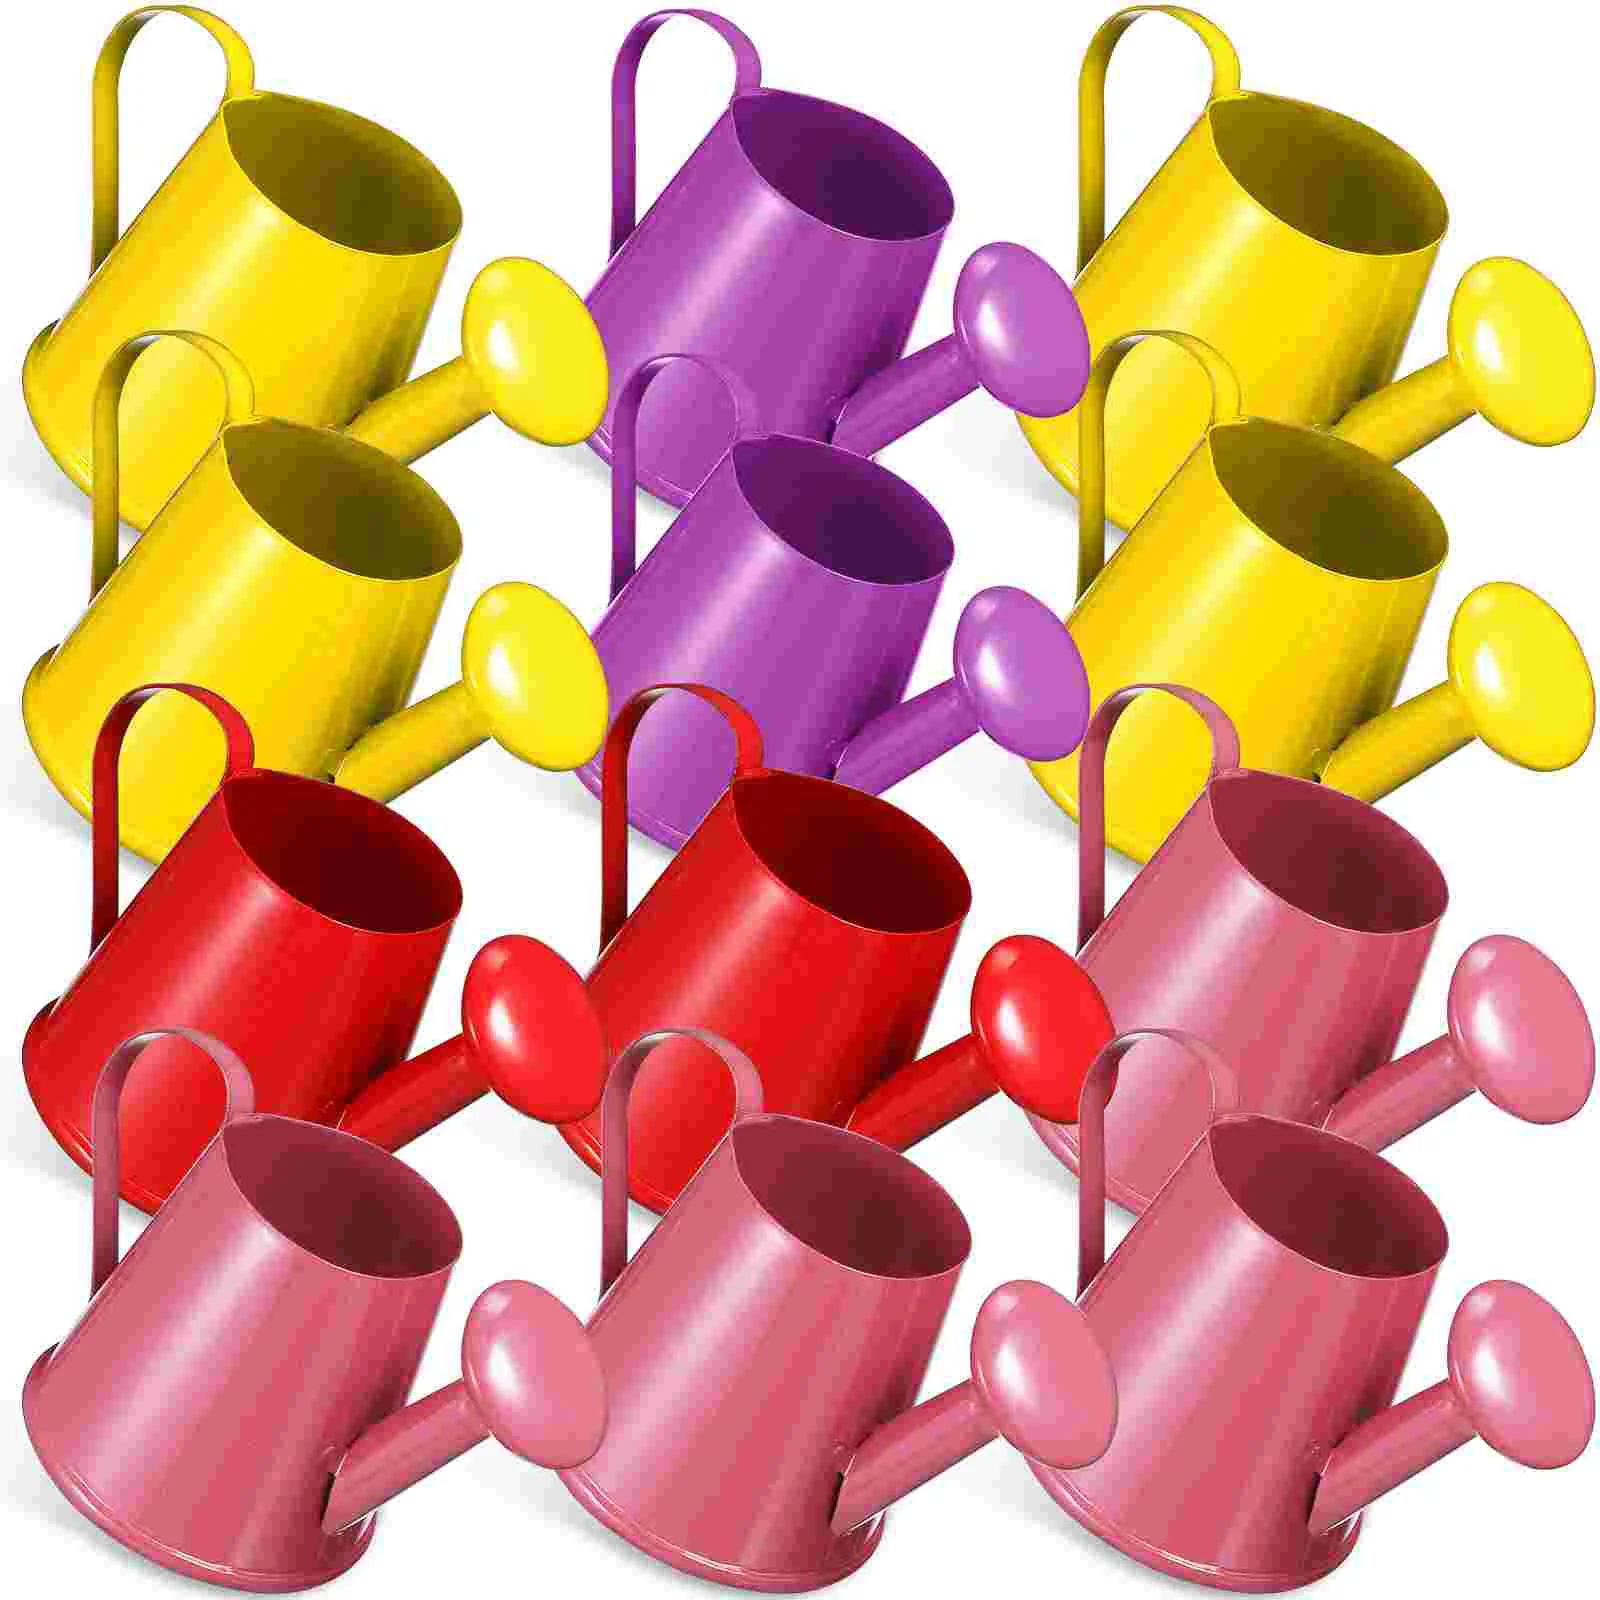 

12 Pcs Mini Super Small Pouring Watering Kettles Can Watering Can For Kids Vase Iron Cans Toy Toddler Jug